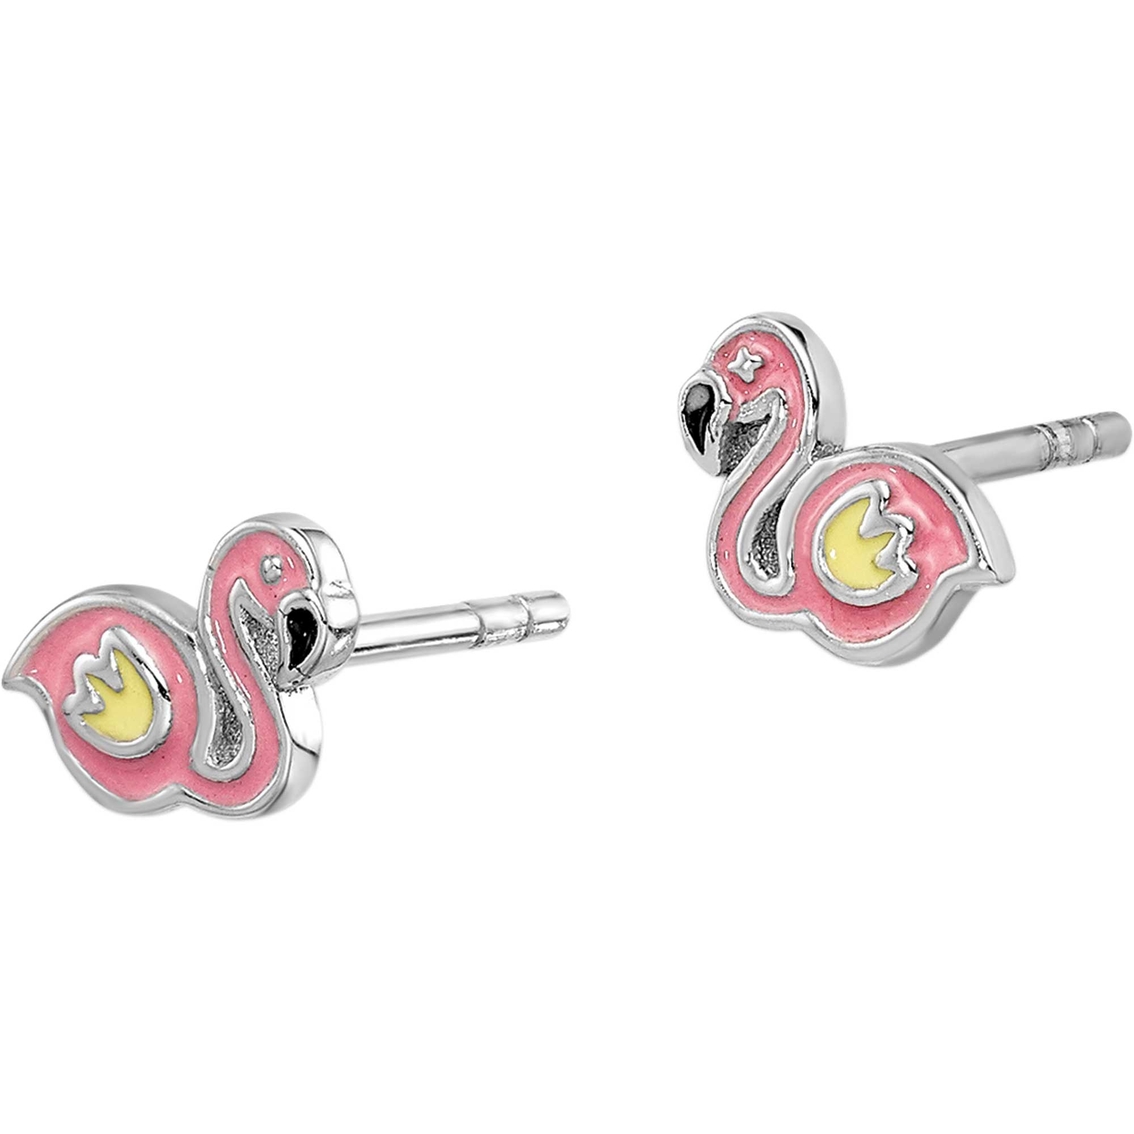 Sterling Silver Rhodium Plated Childs Enameled Flamingo Post Earrings - Image 2 of 2